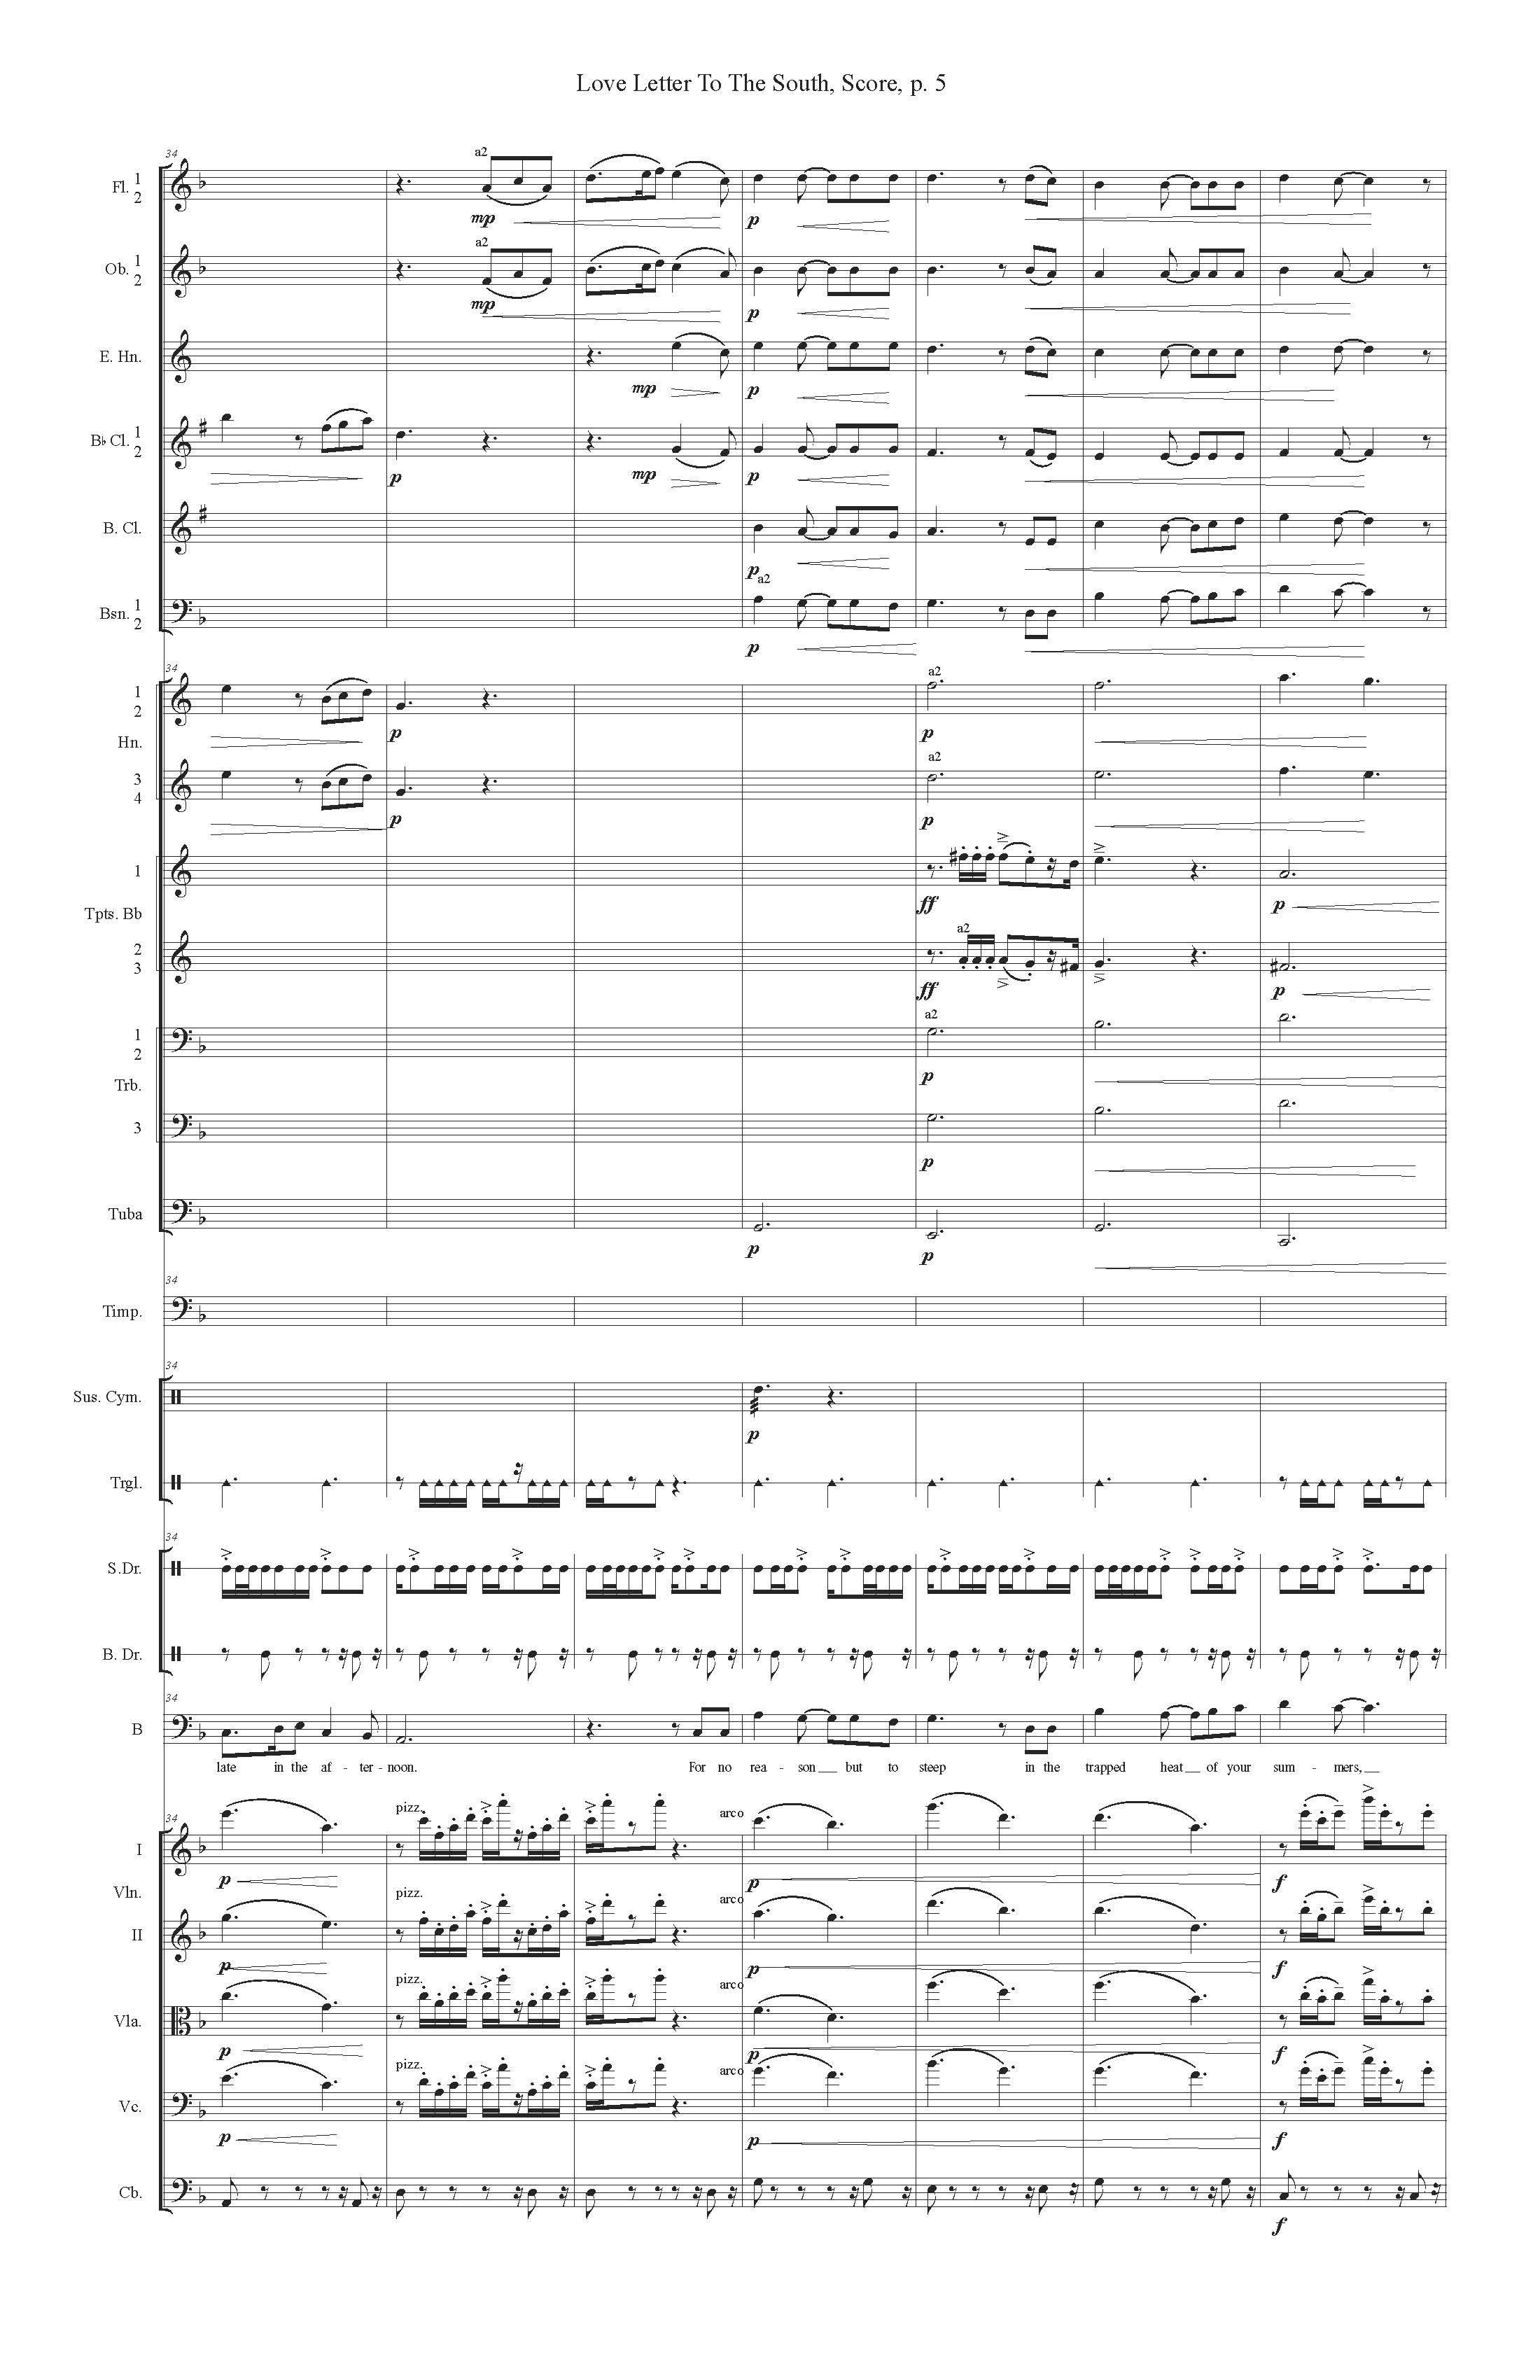 LOVE LETTER TO THE SOUTH ORCH - Score_Page_05.jpg